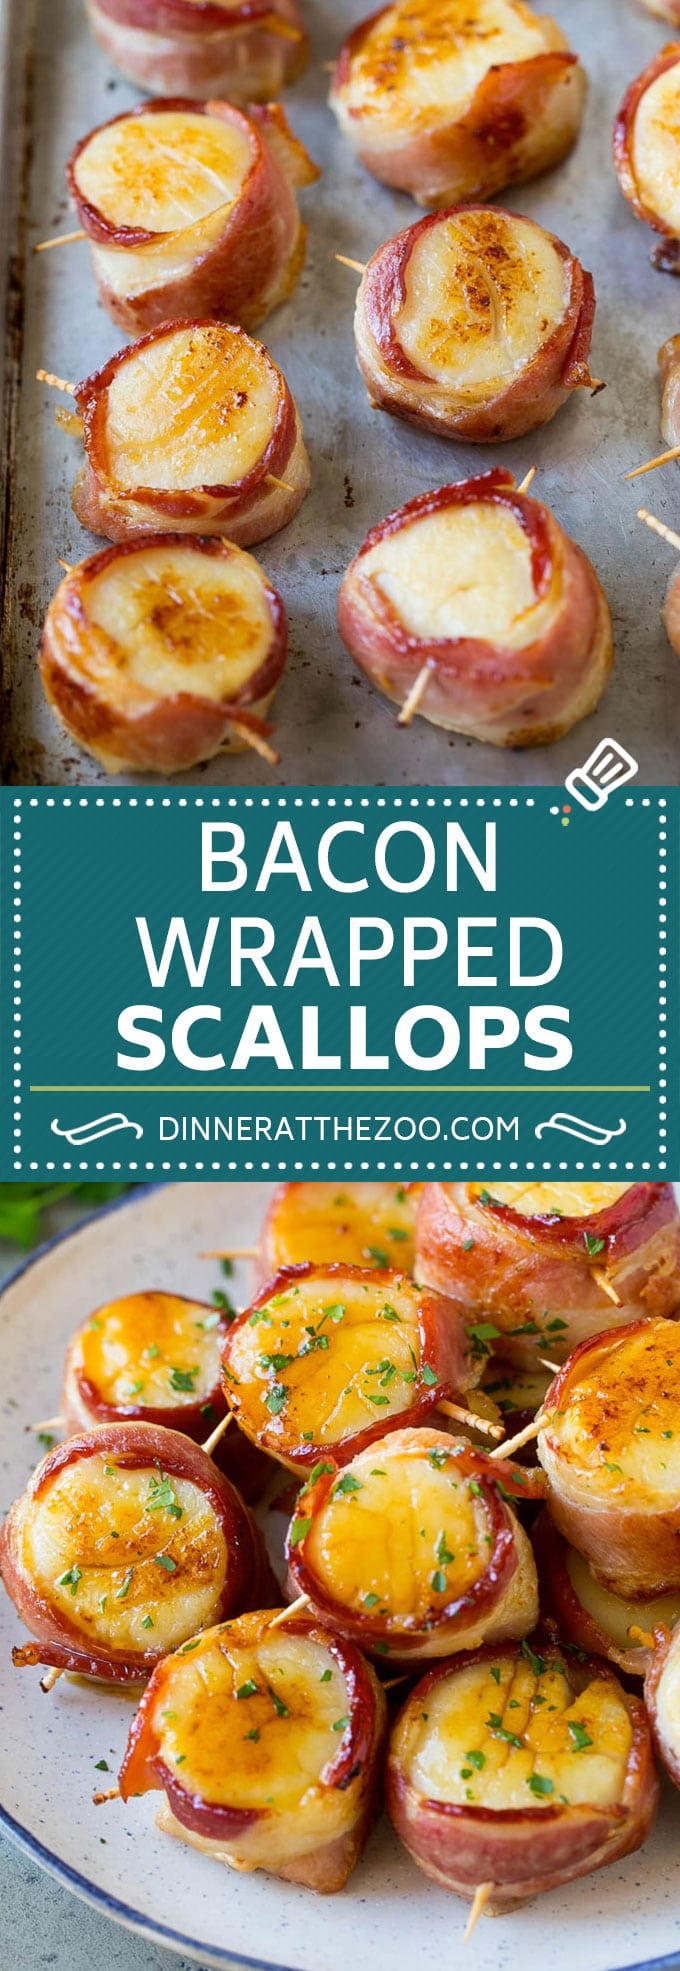 Bacon Wrapped Scallops Dinner At The Zoo,Indian Cooking Wallpaper